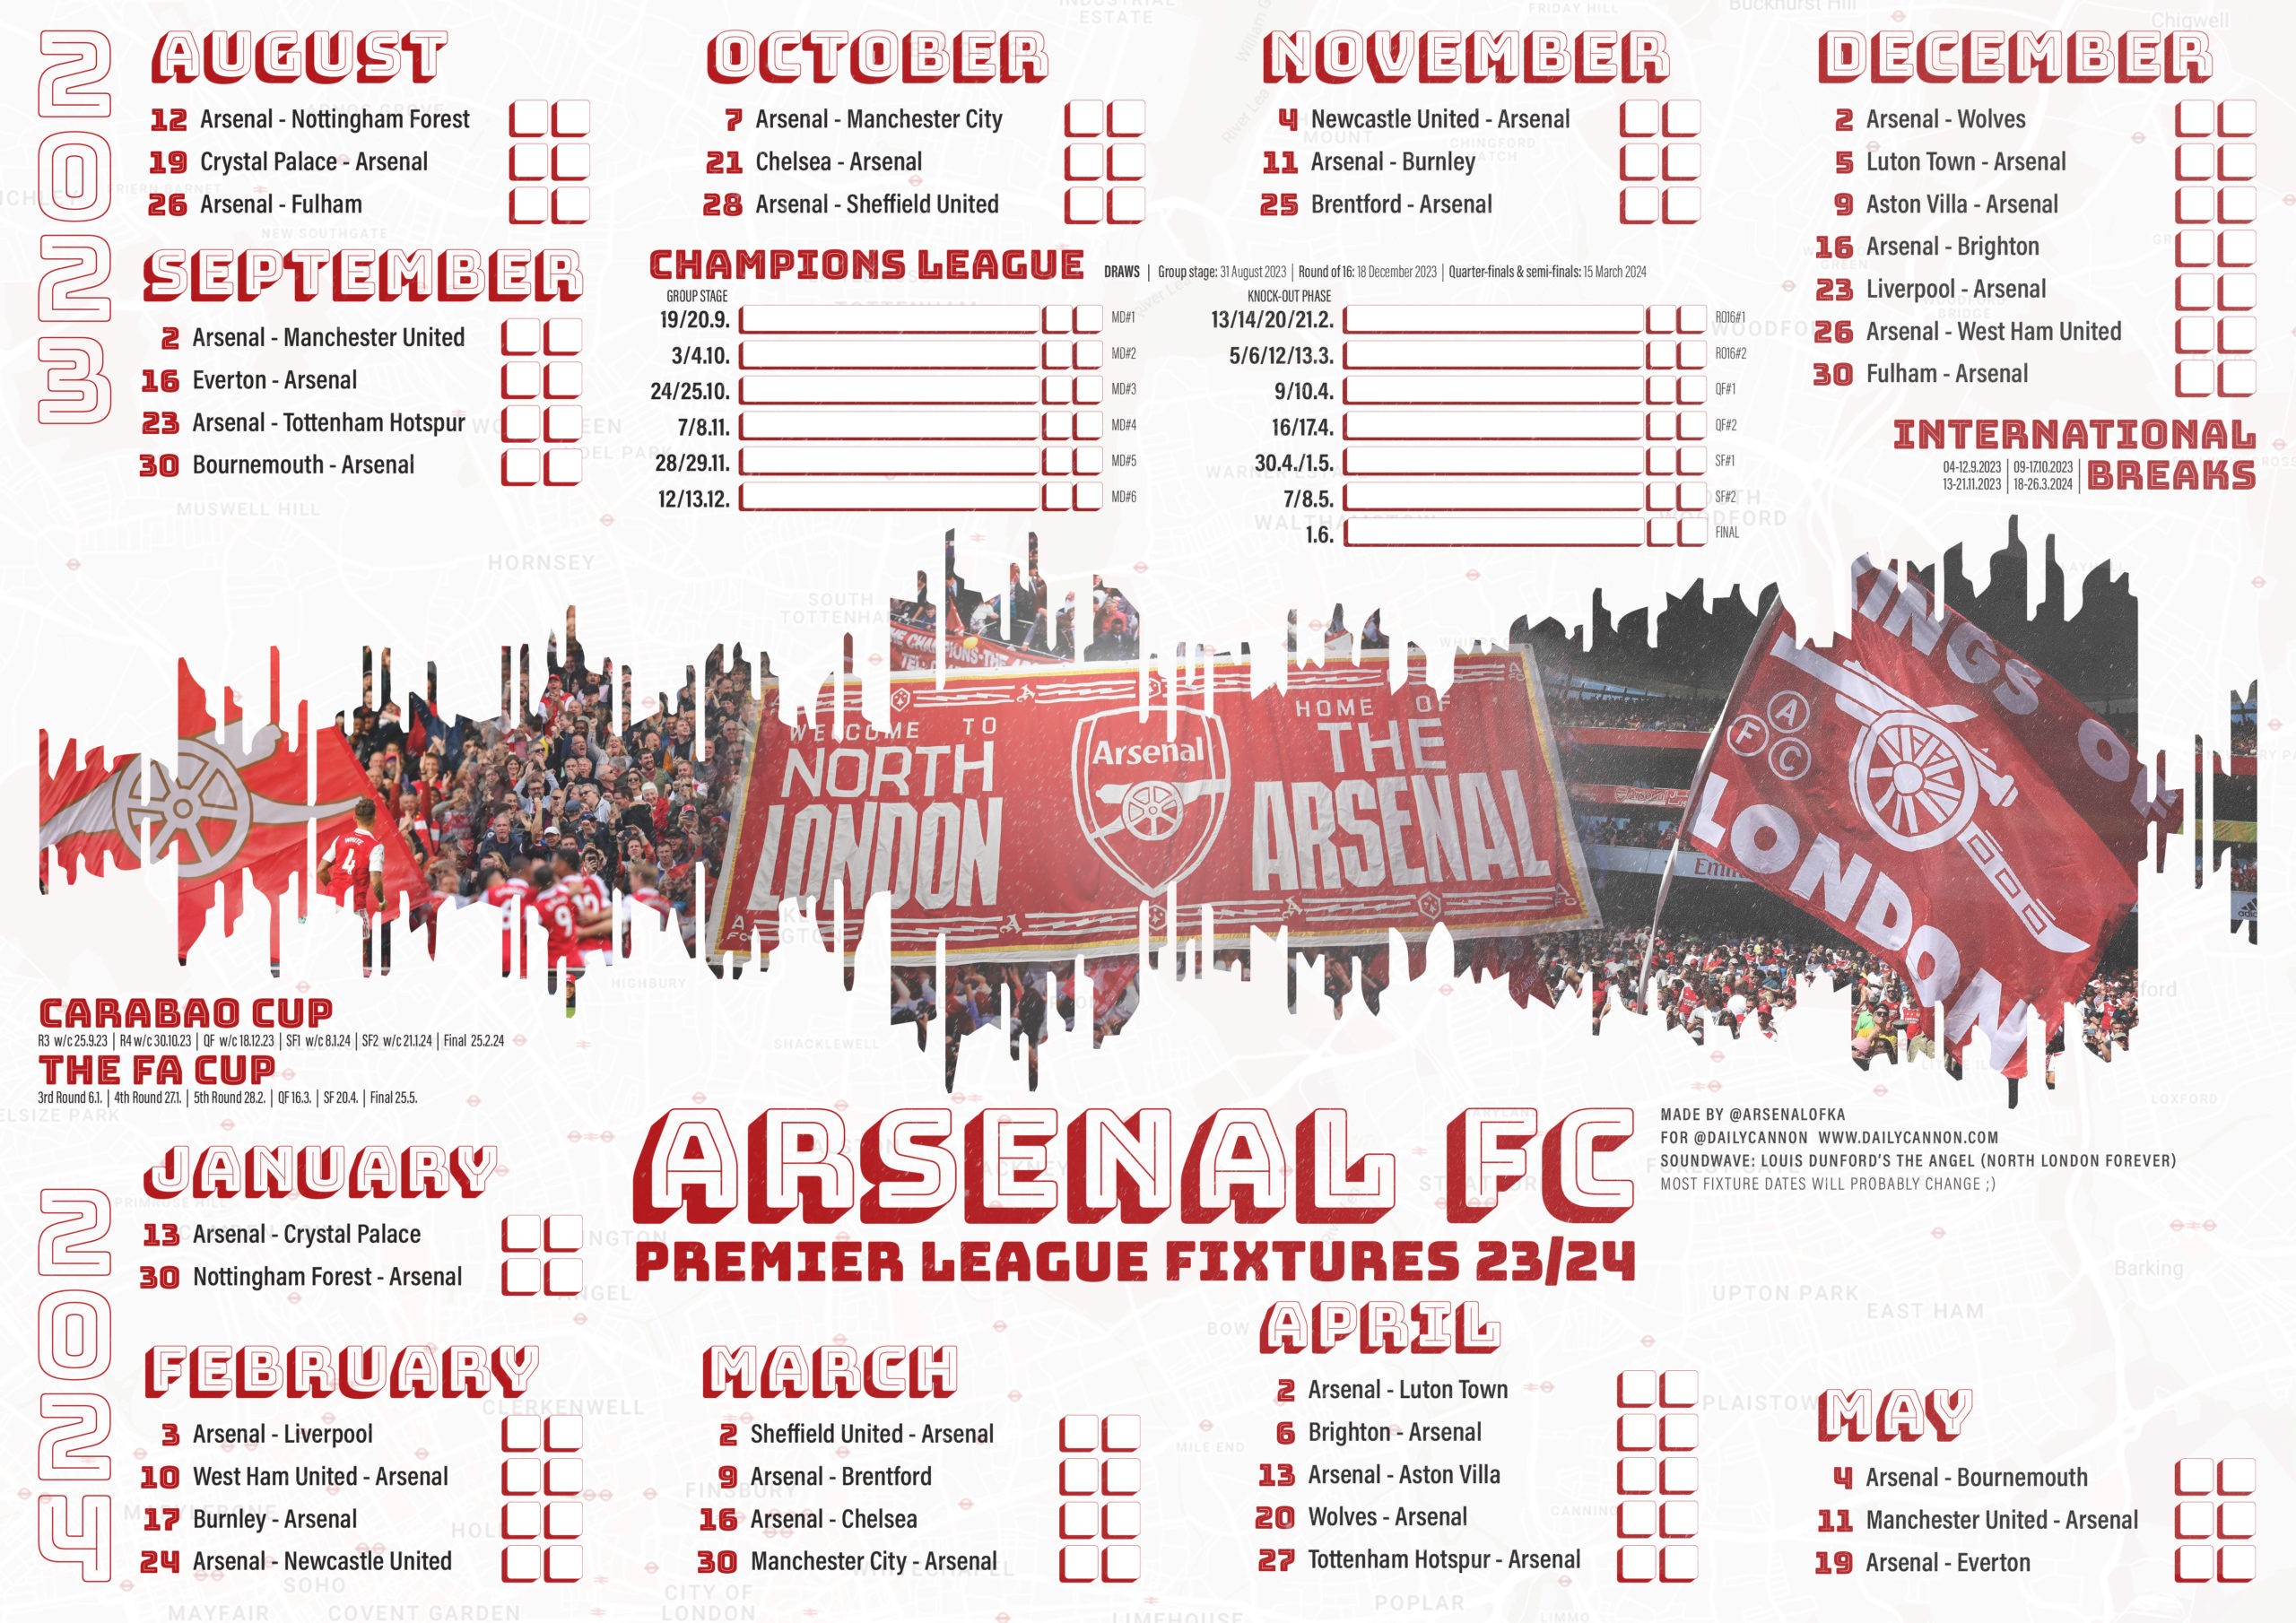 Downloadable Arsenal fixtures for 23/24 season Never miss a match!